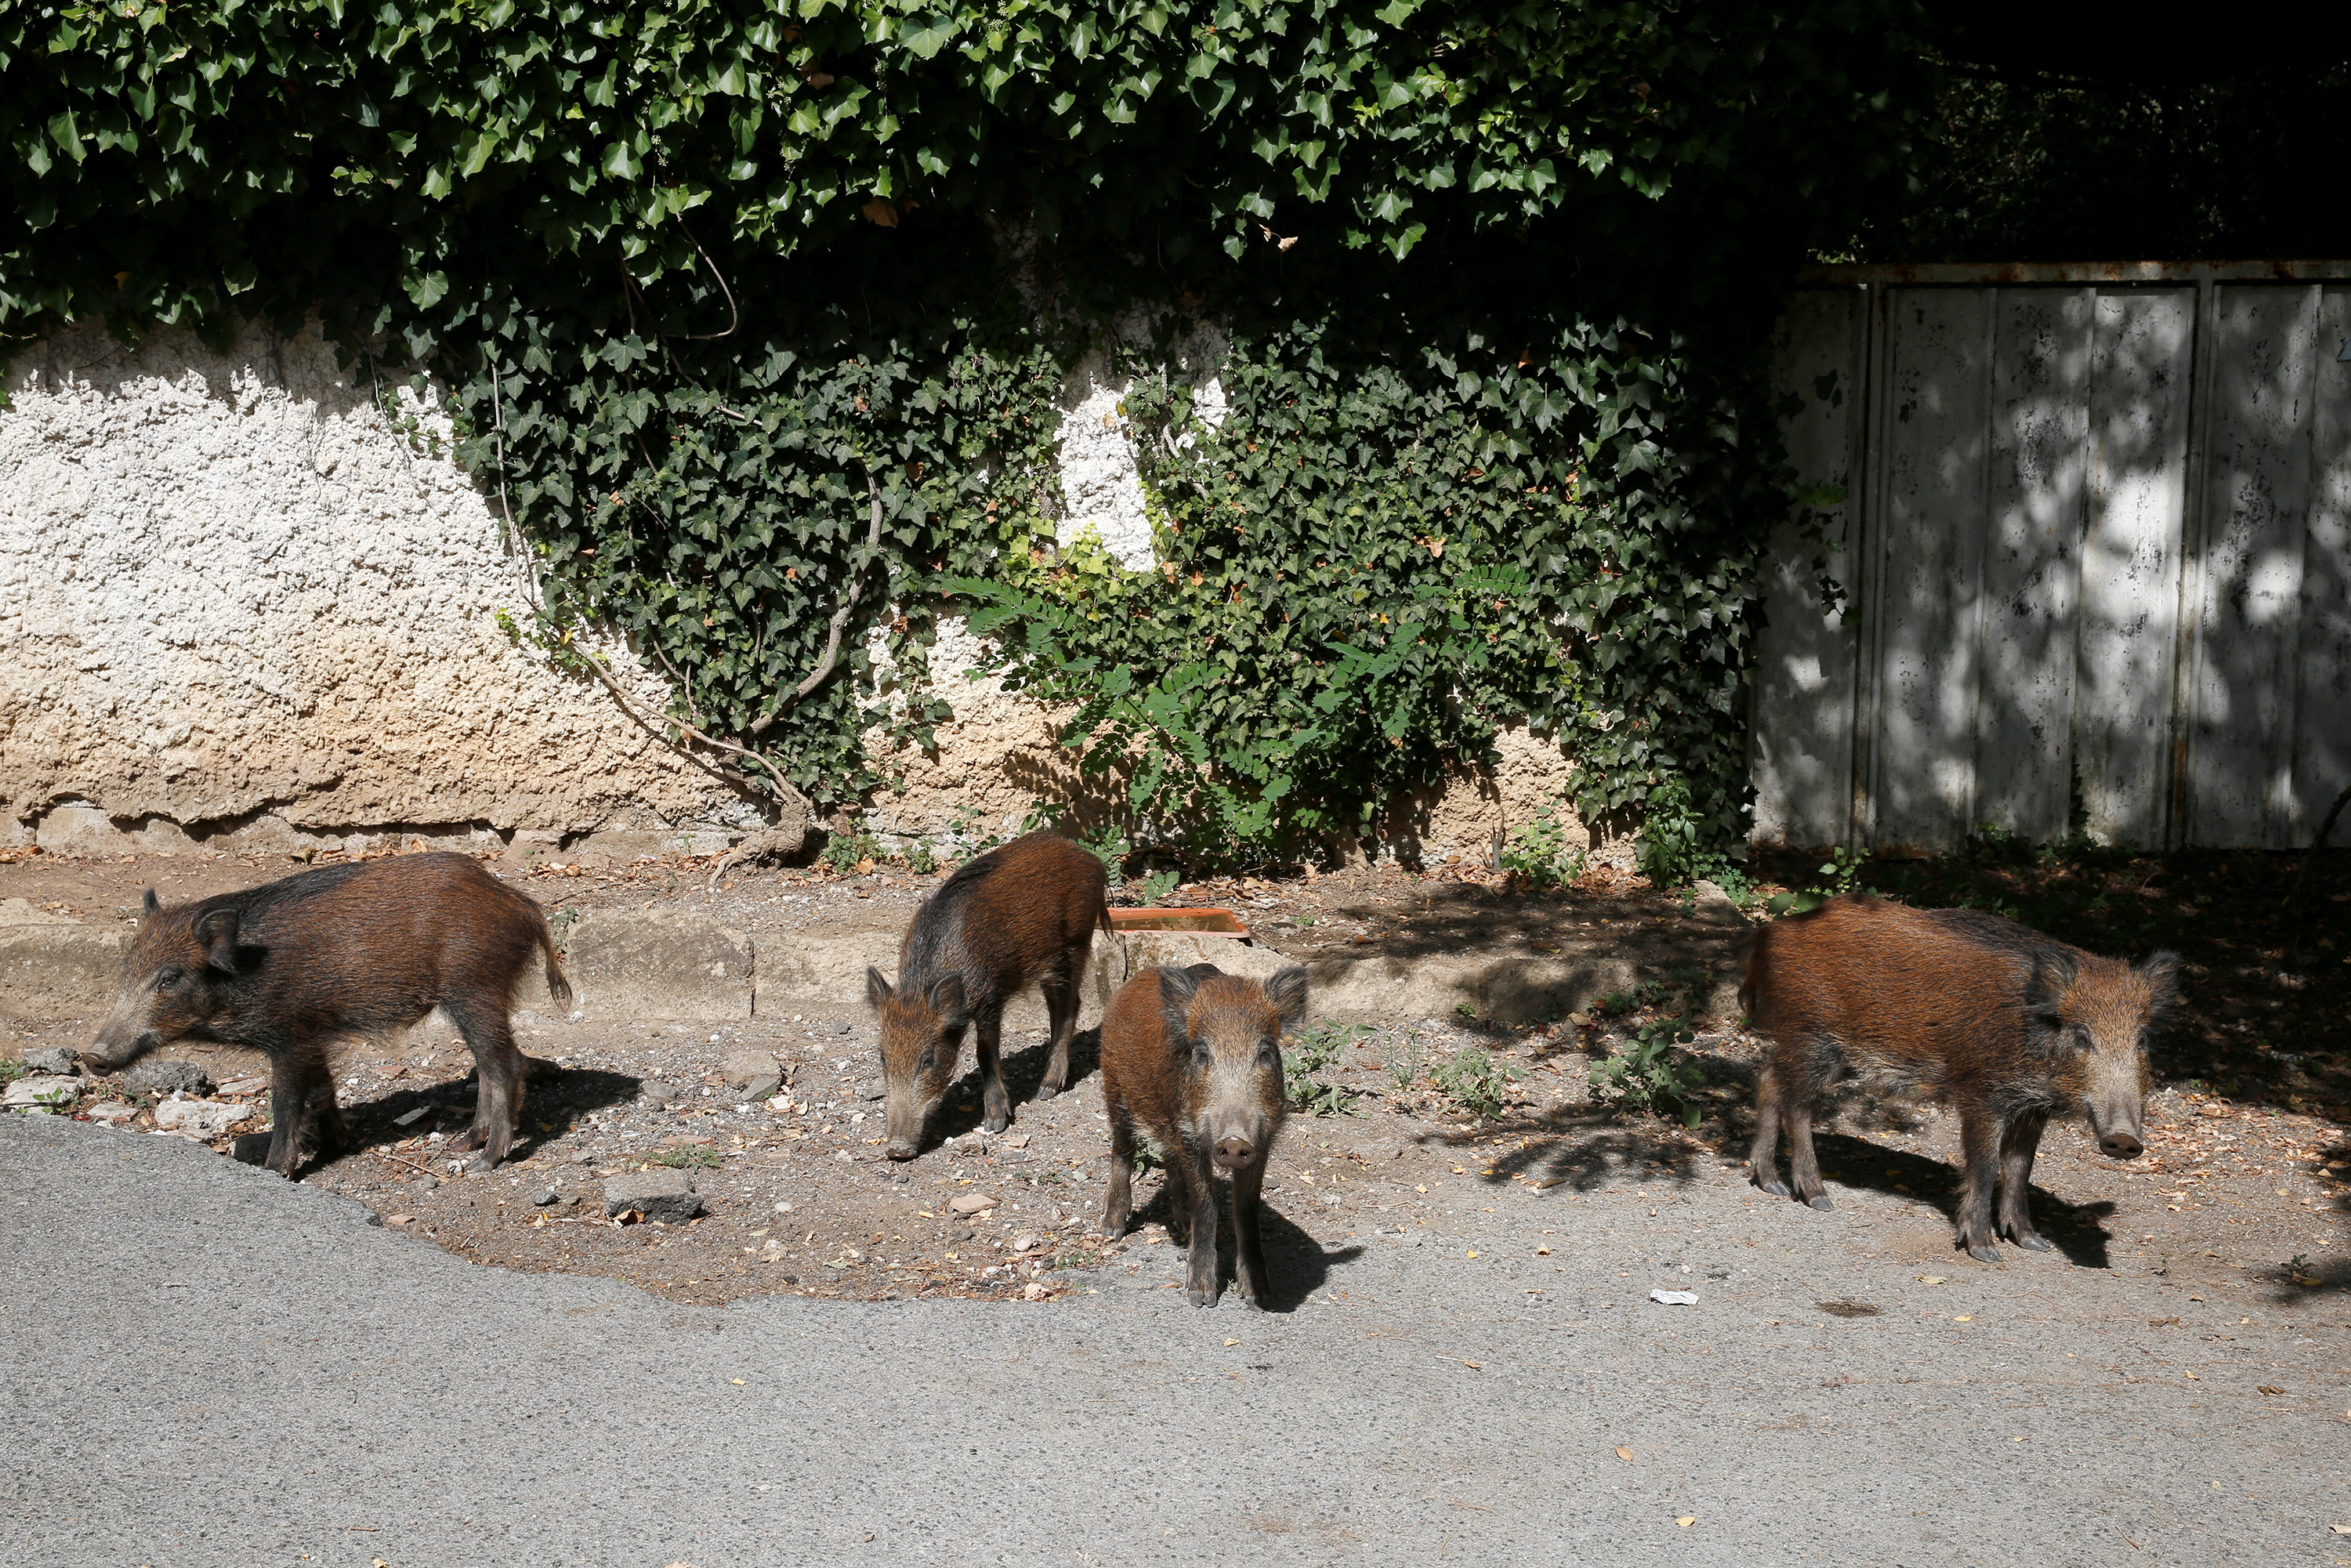 Wild boars roam street foraging for food in Rome